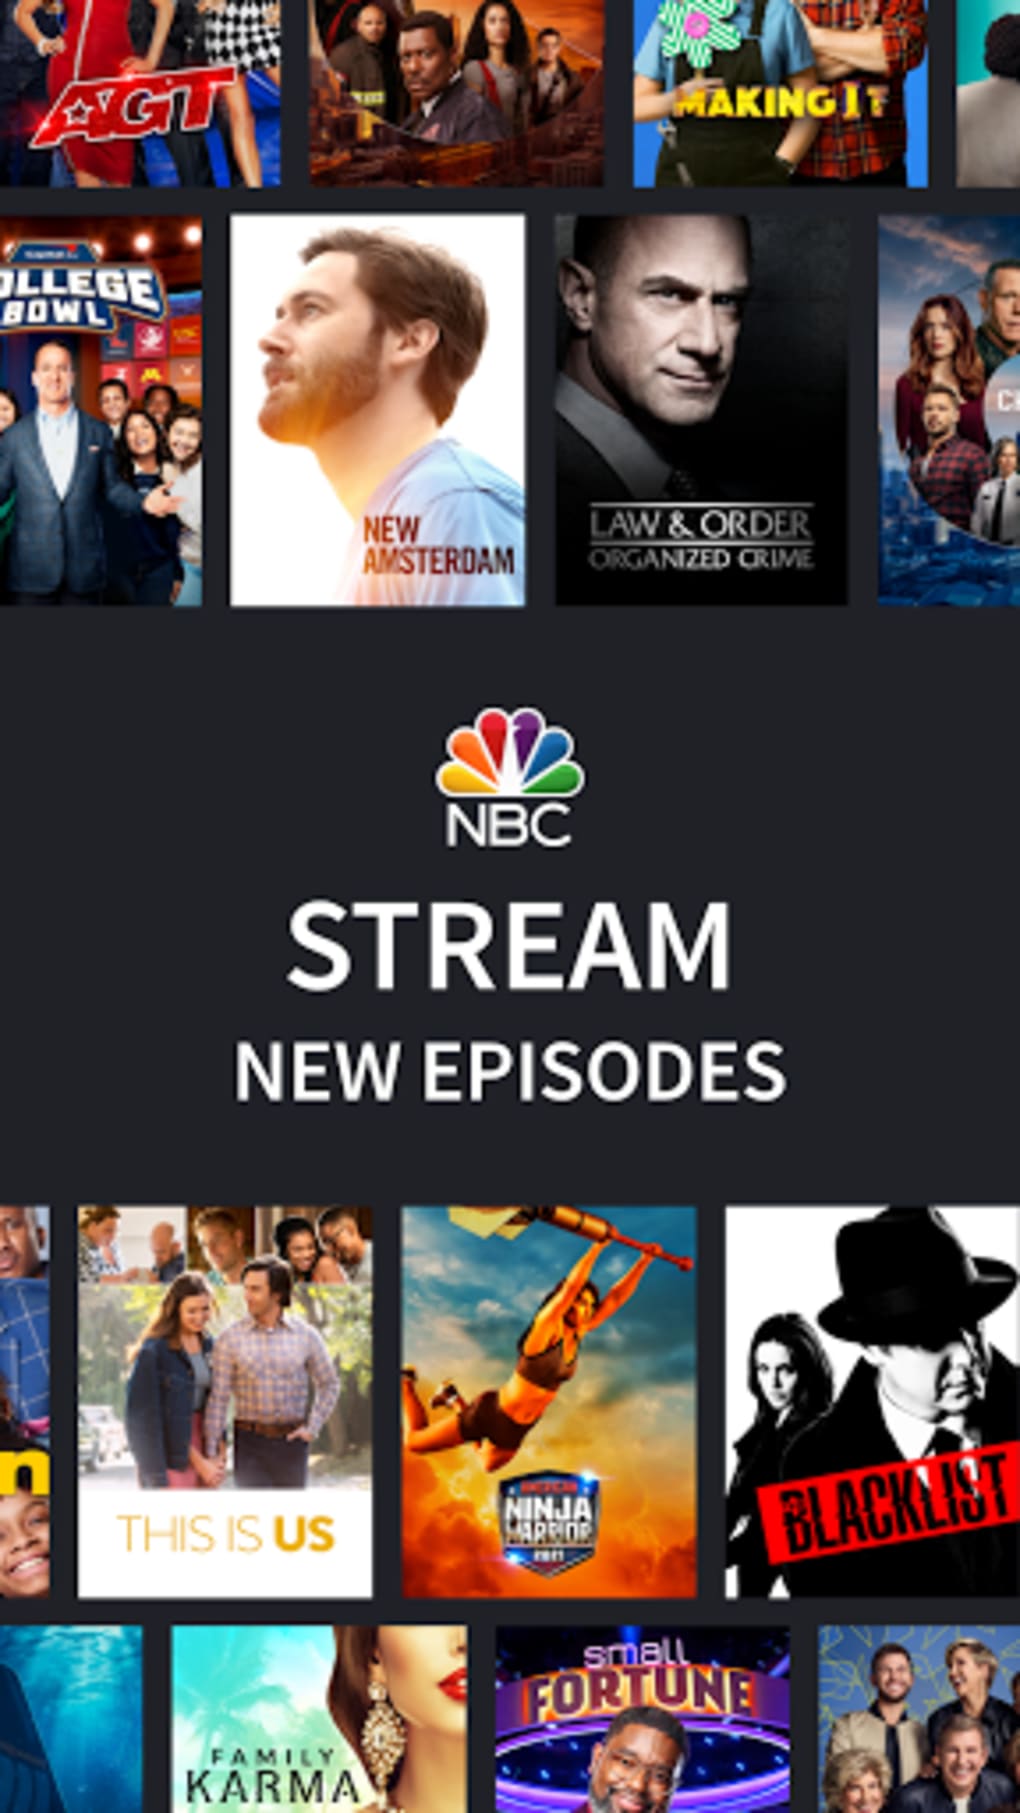 nbc app for android not working